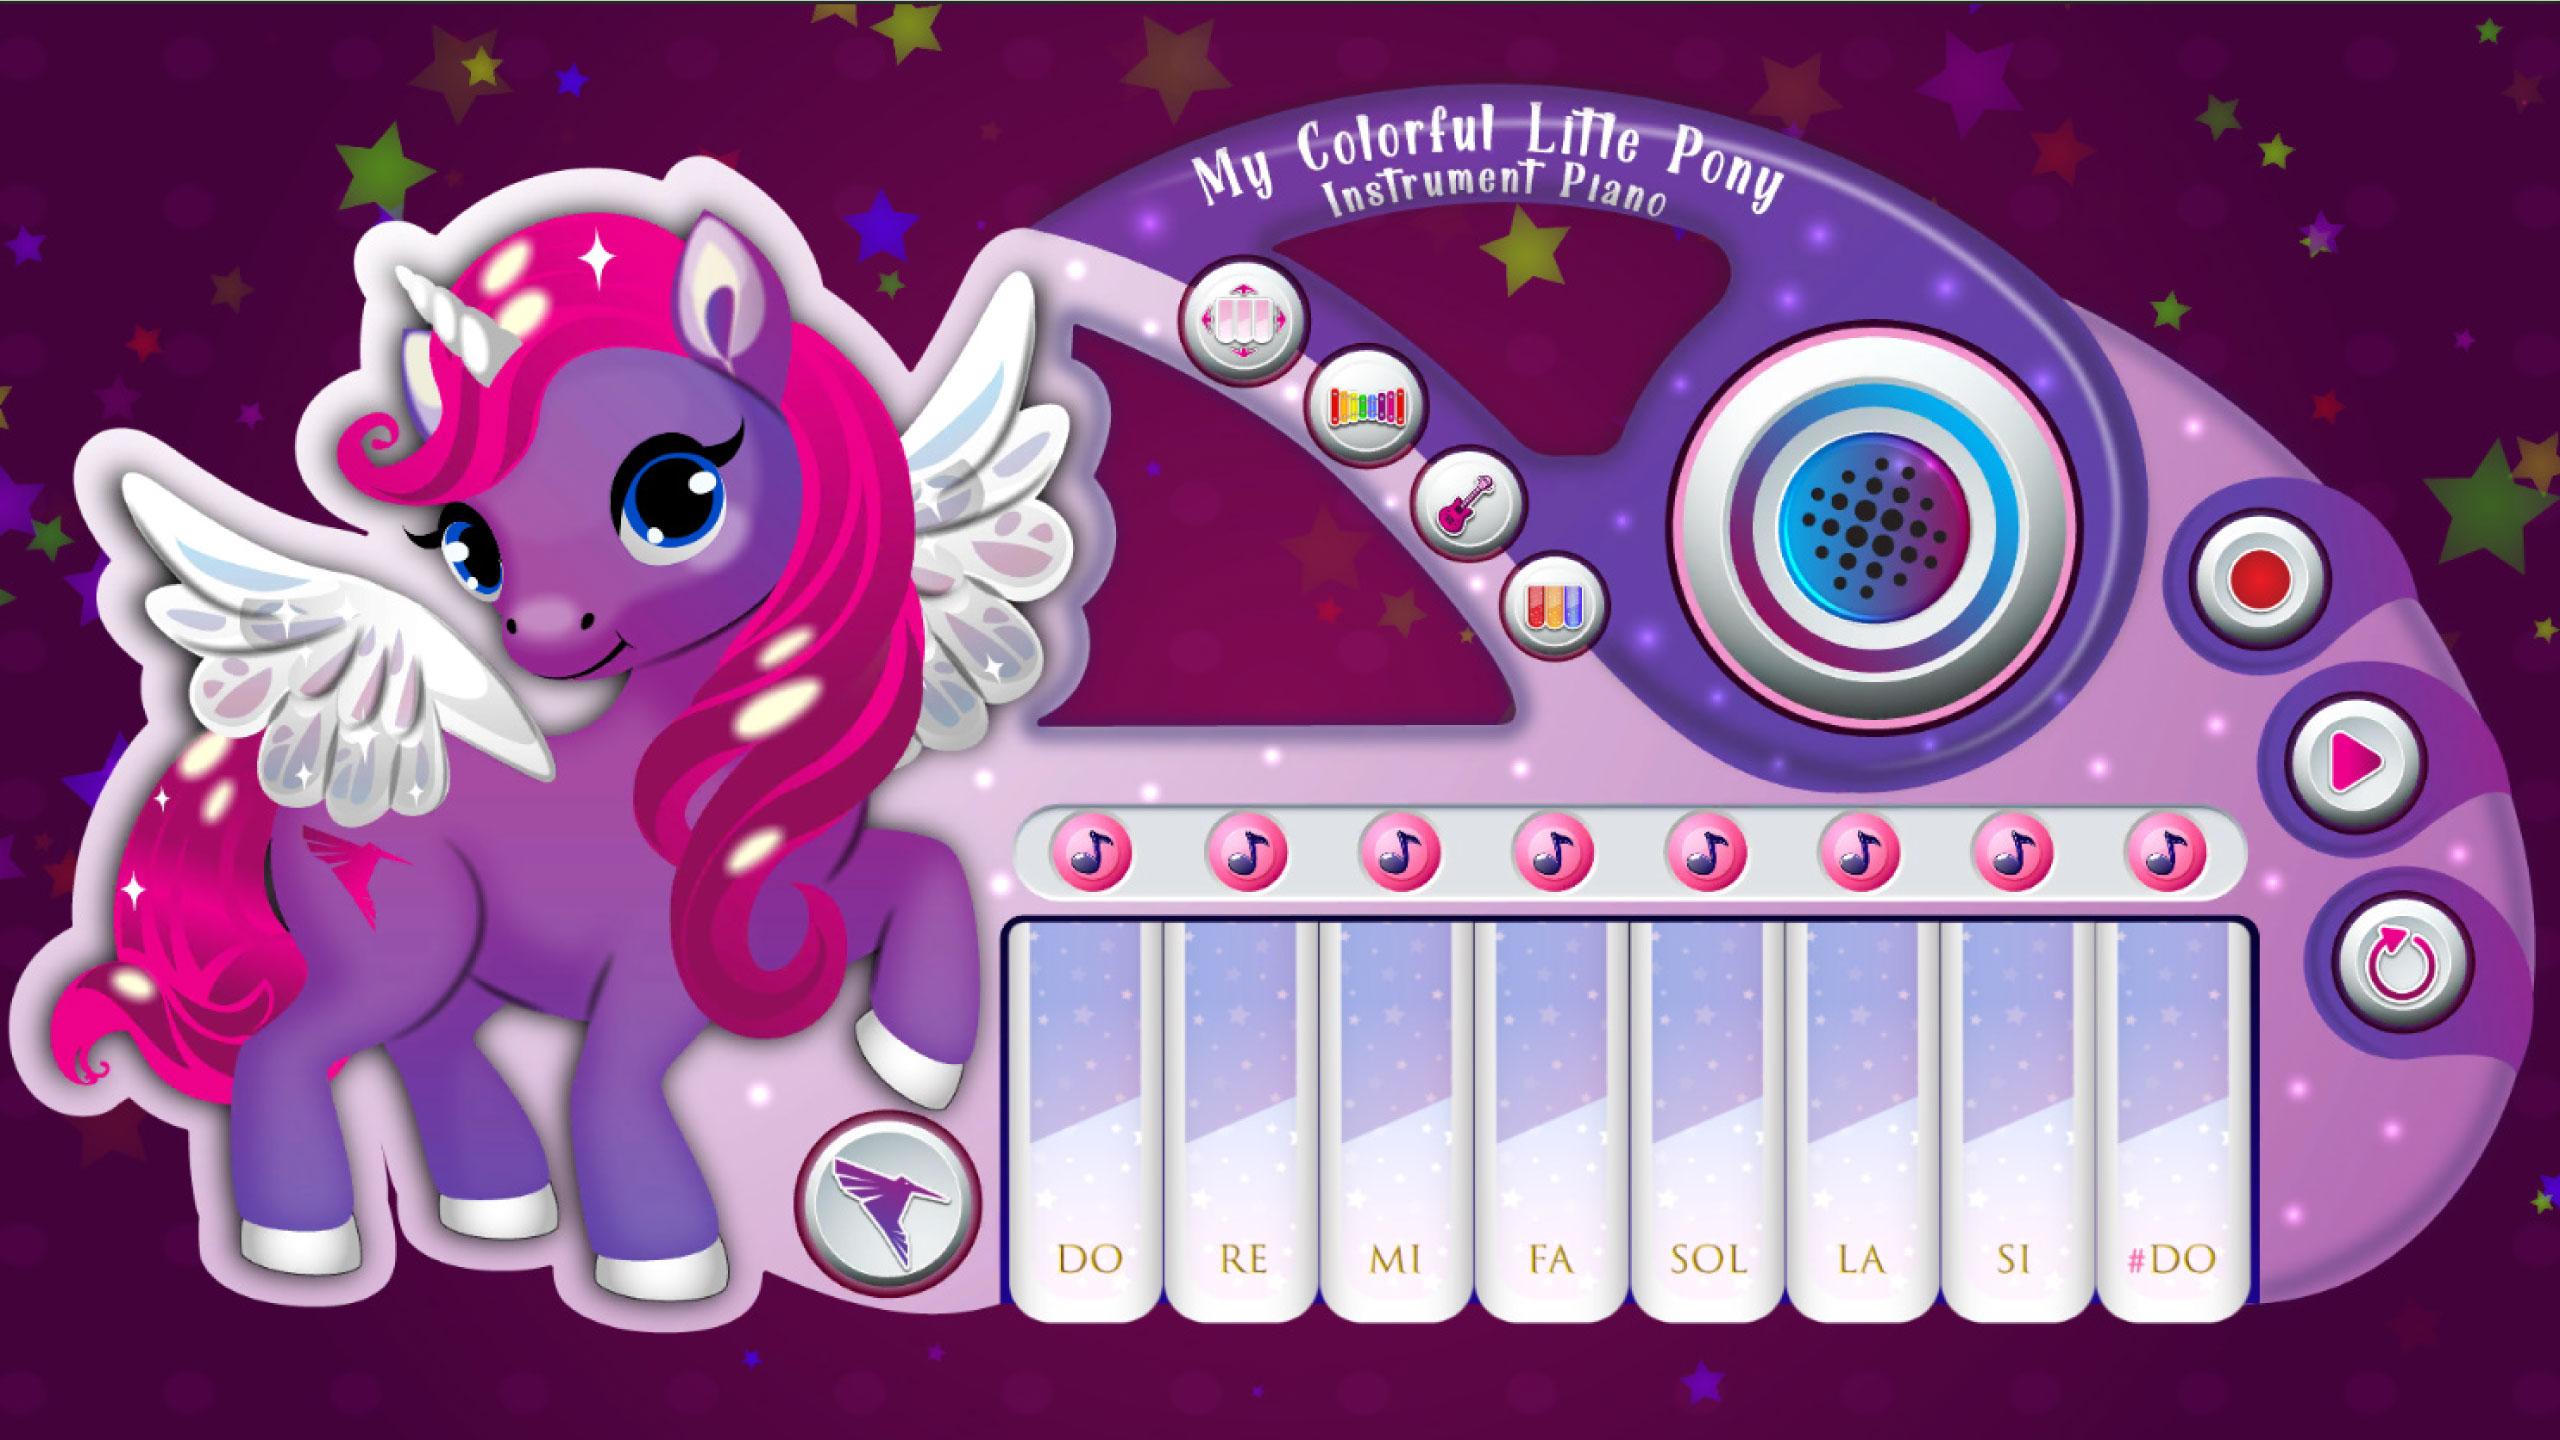 My Colorful Litle Pony Instrument - Piano 2.0 Screenshot 15